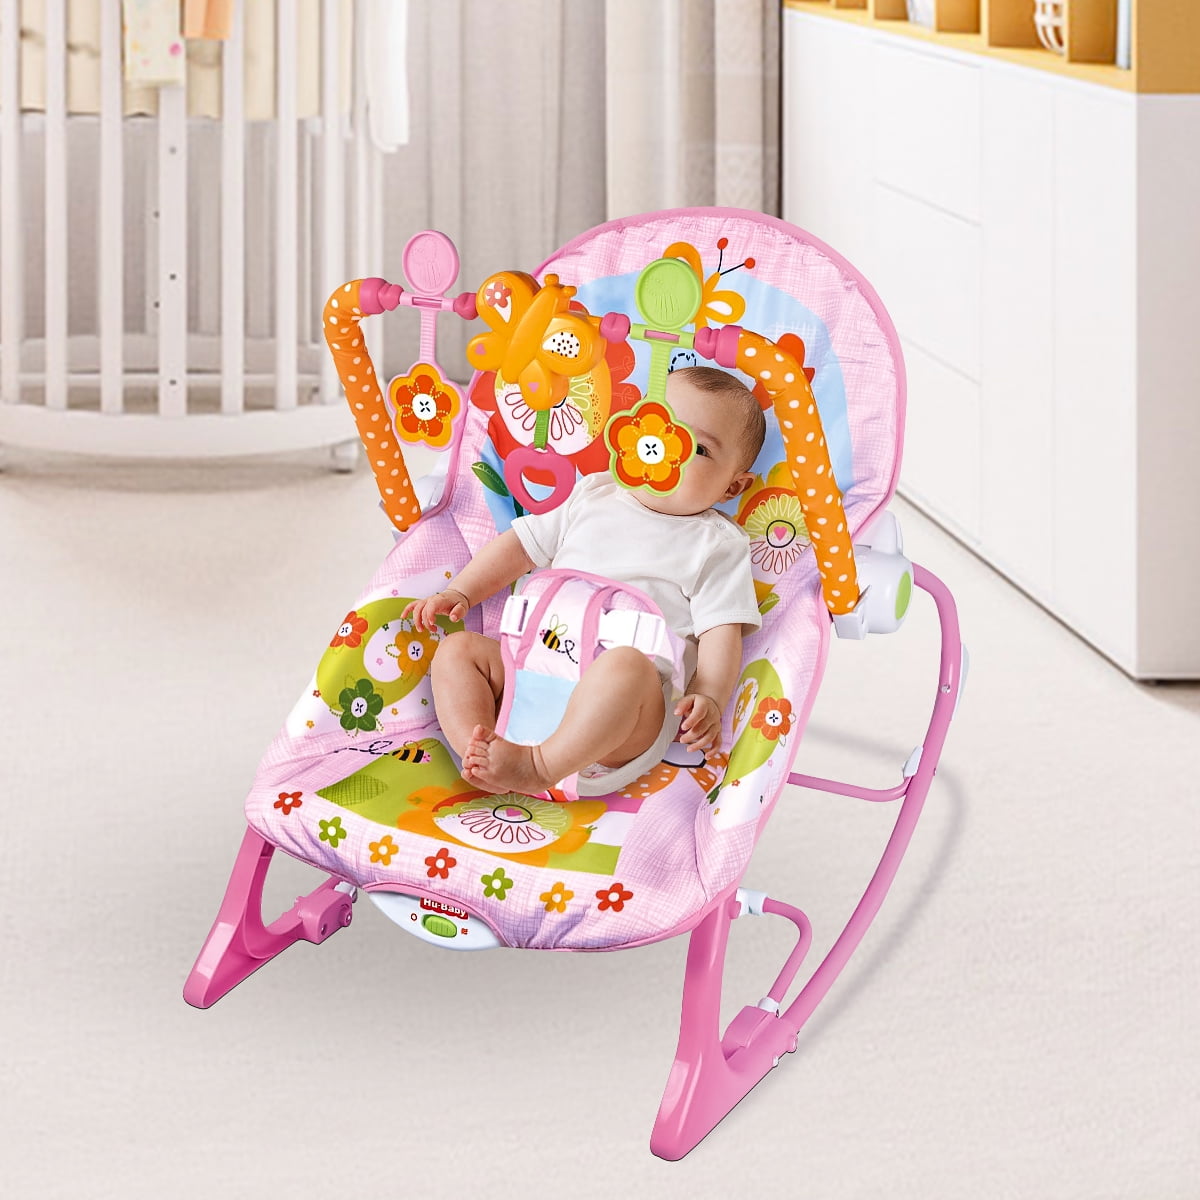 baby bouncer chair age